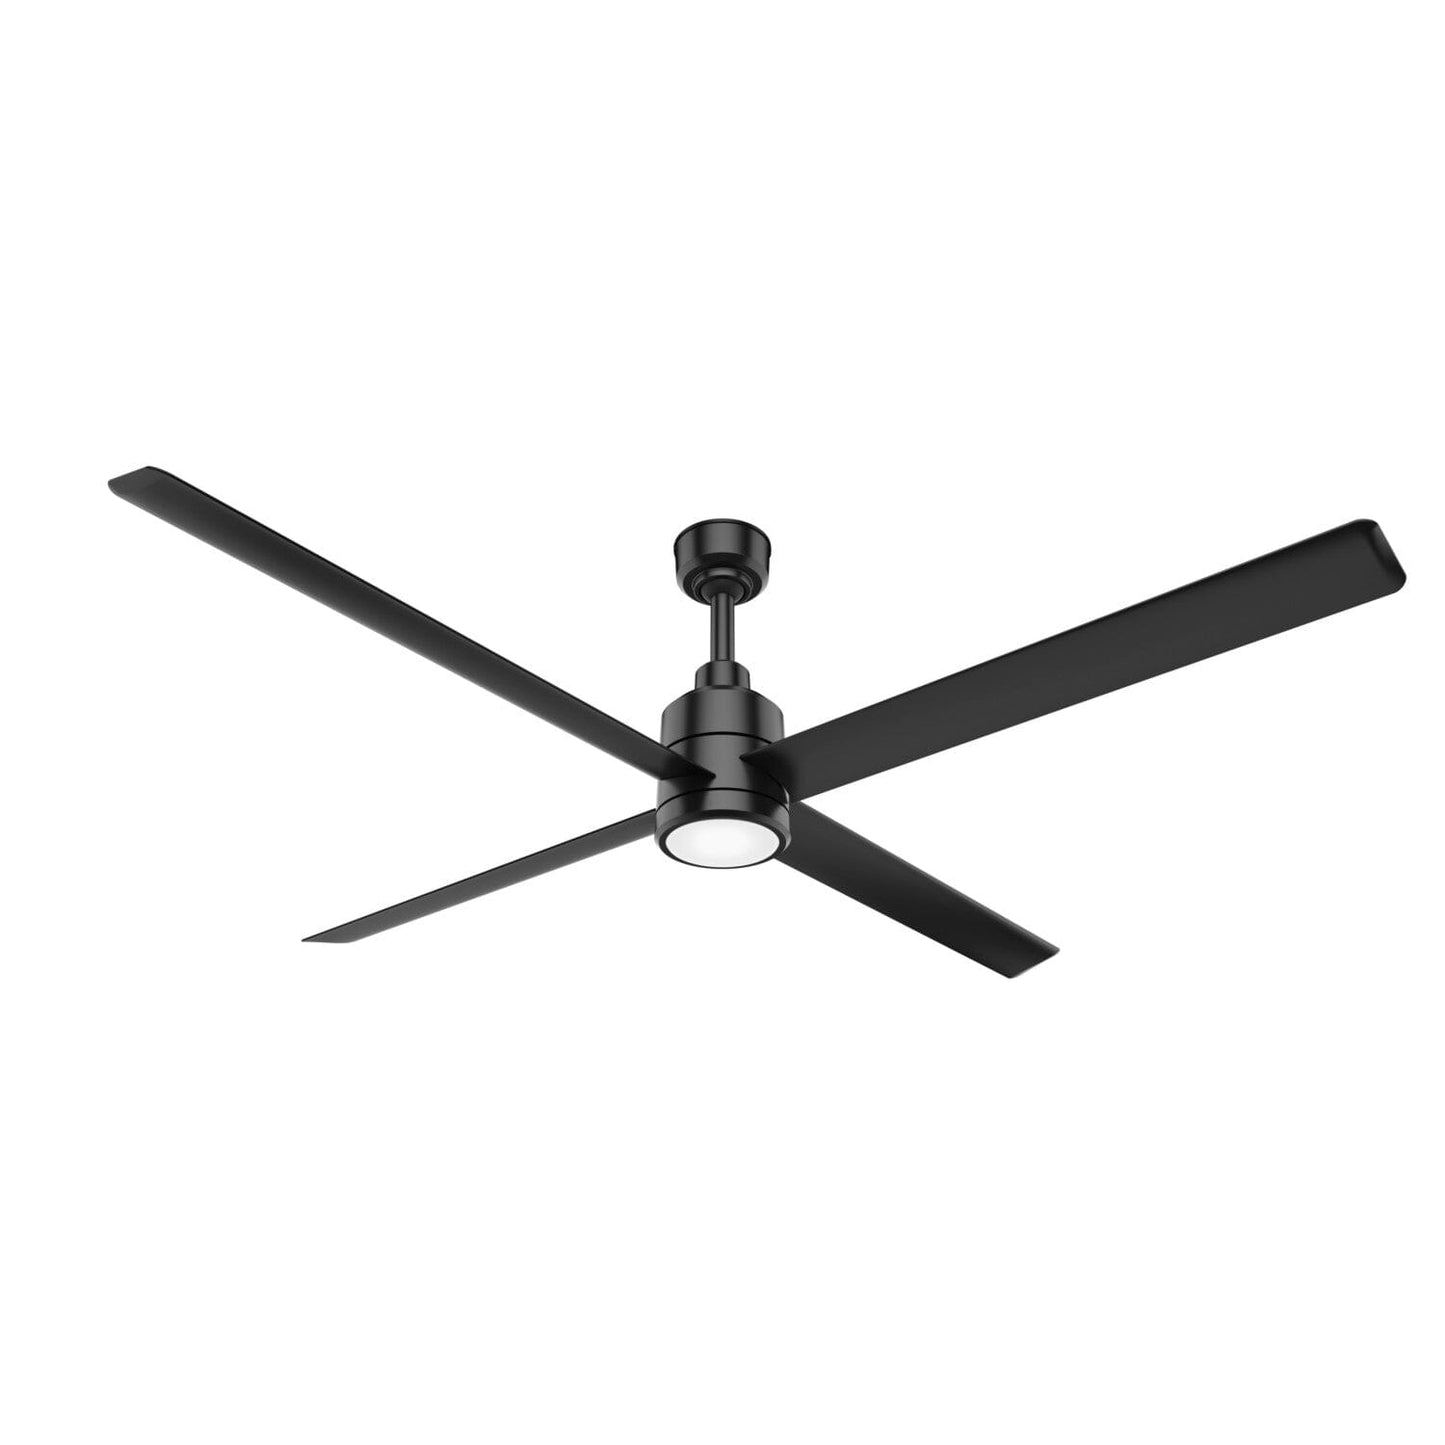 Trak Outdoor with light 96 inches 120V Ceiling Fans Hunter Black - Black 